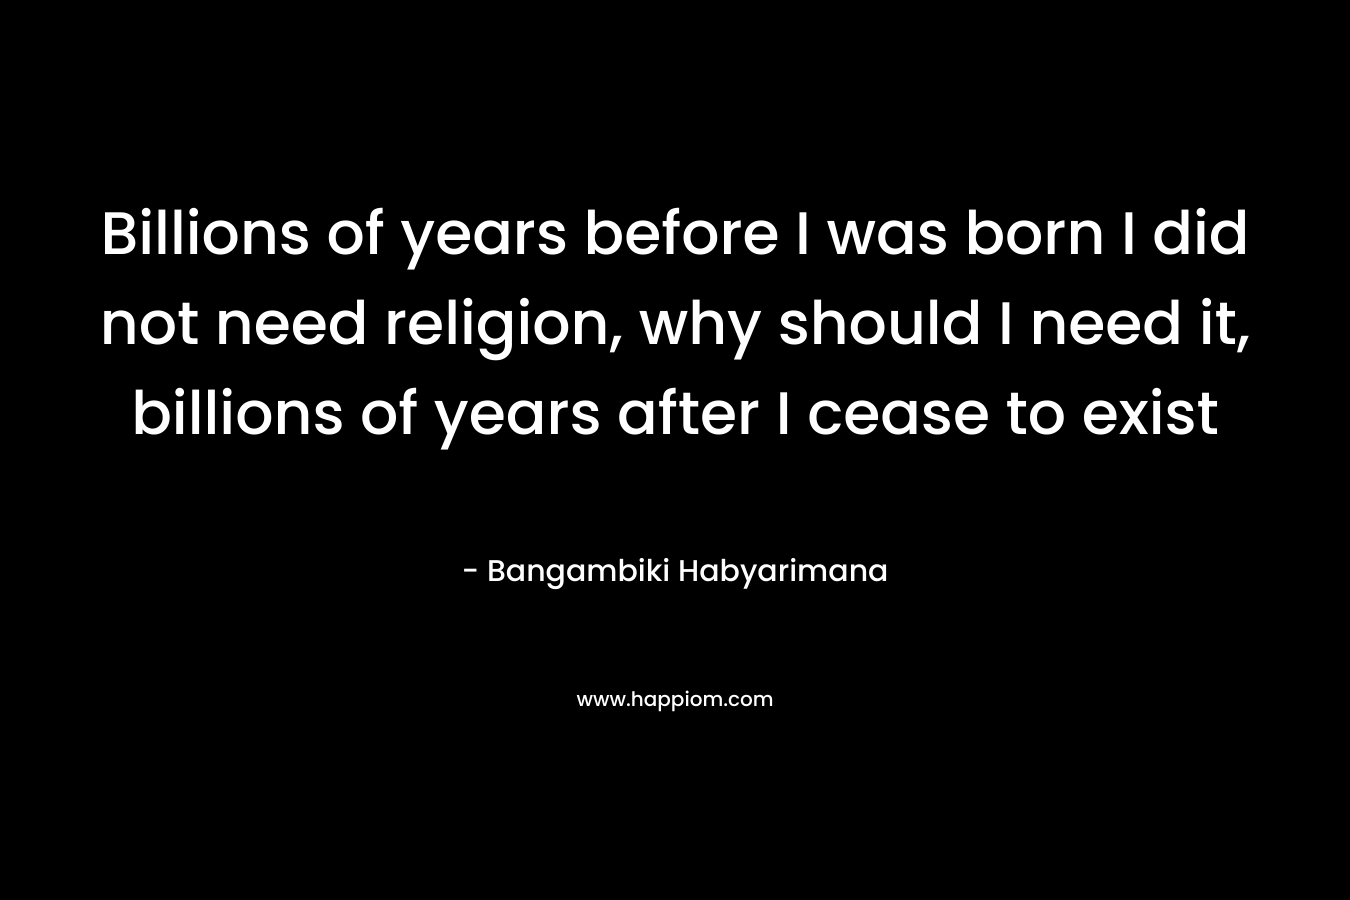 Billions of years before I was born I did not need religion, why should I need it, billions of years after I cease to exist